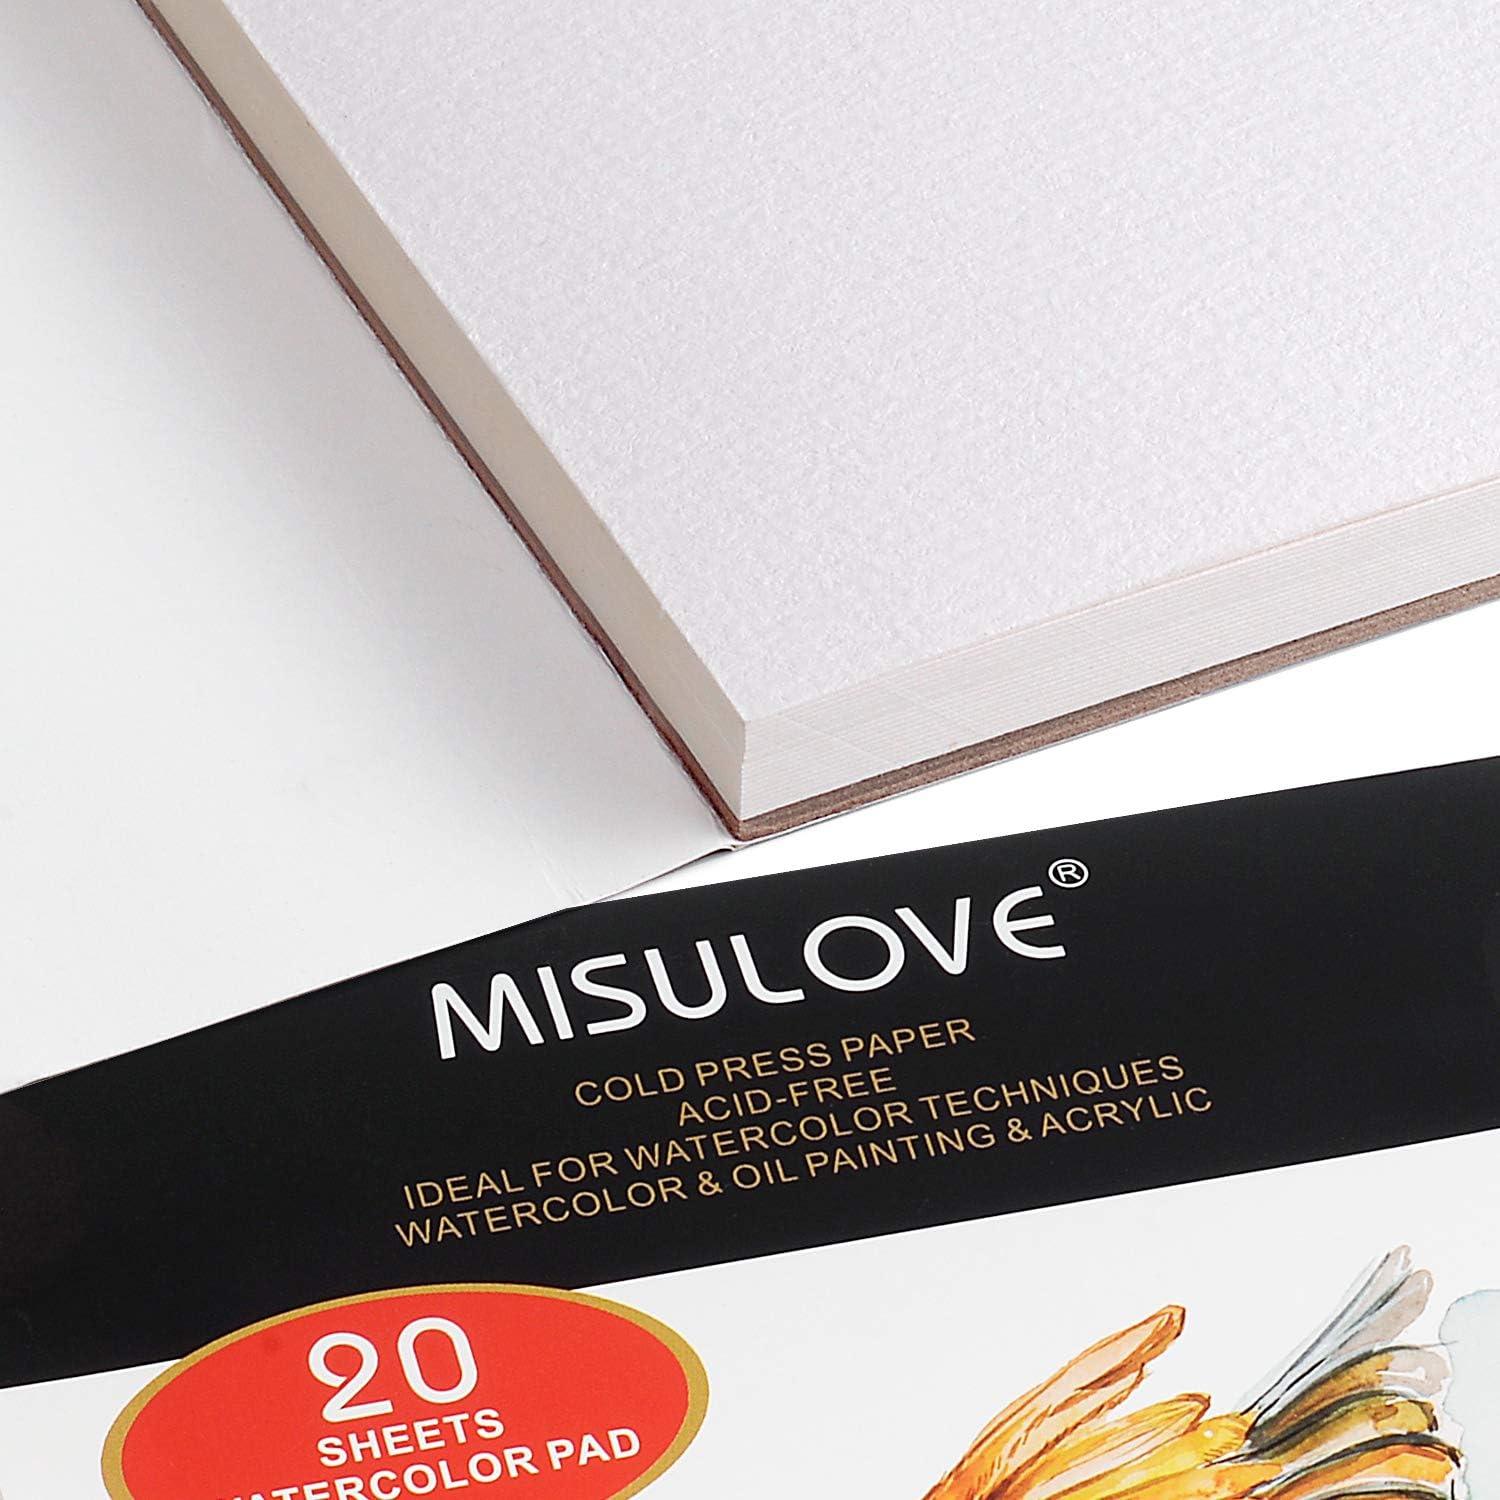 MISULOVE 6.1X8.7 Watercolor Paper Pad, Cold-Pressed, Acid-Free, Ideal for  Watercolor Painting and Wet Media, Textured Paper Great and Sketchbook, Art  Paper for Kid, 20 White Sheets (140lb/300gsm)